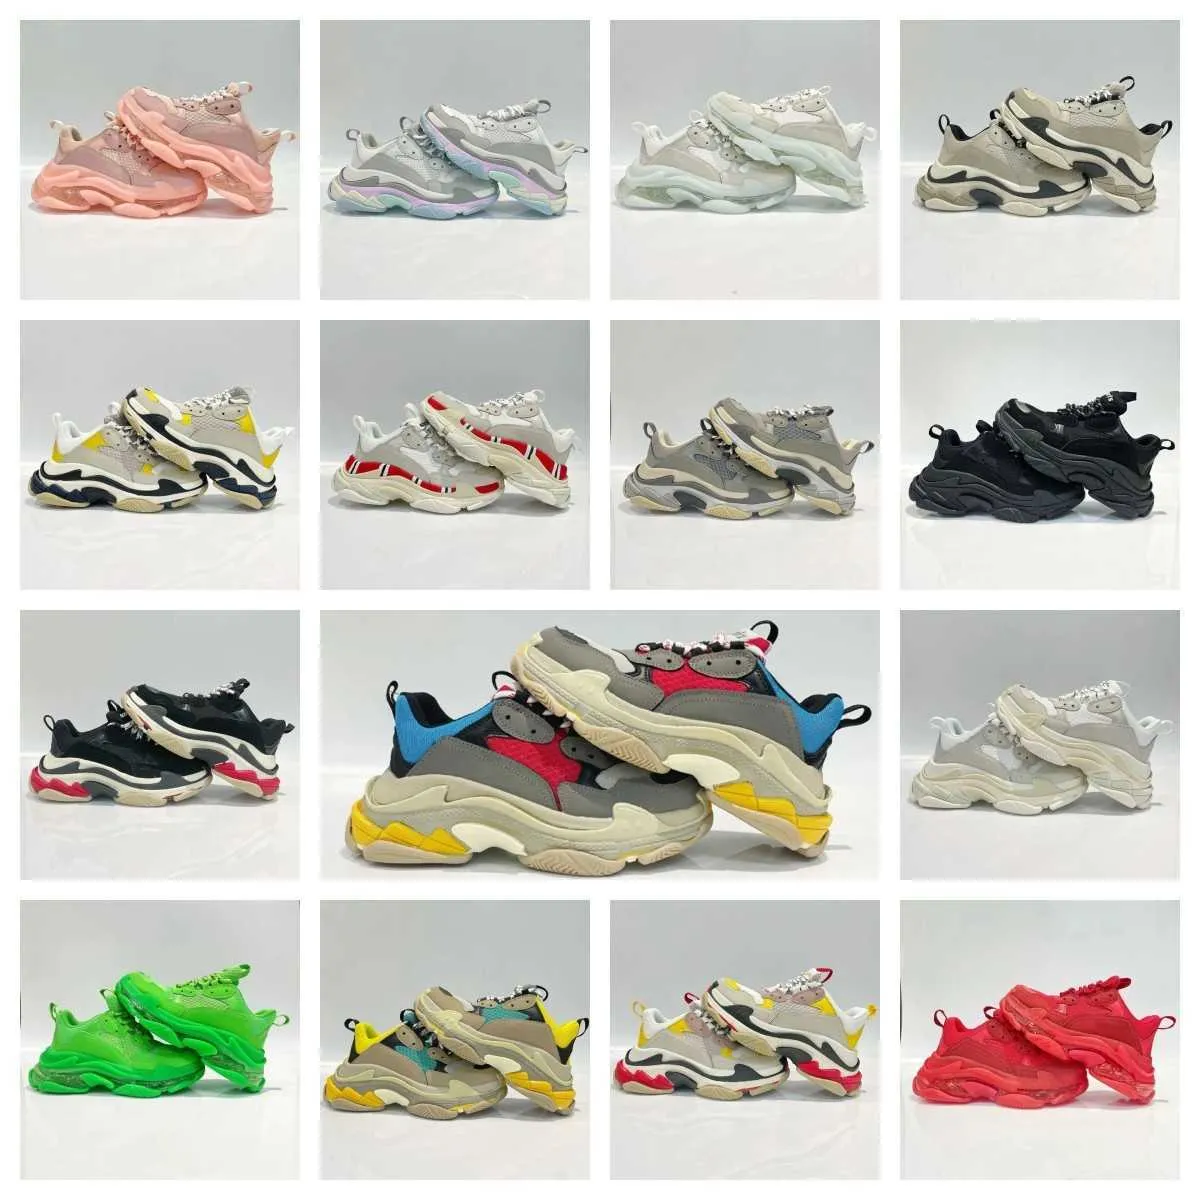 Balanciagae'sa popular designer shoes casual outdoor travel sneakers low men's and women's suede men's and women's Daddy sneakers Outdoor sports sneakers running shoes